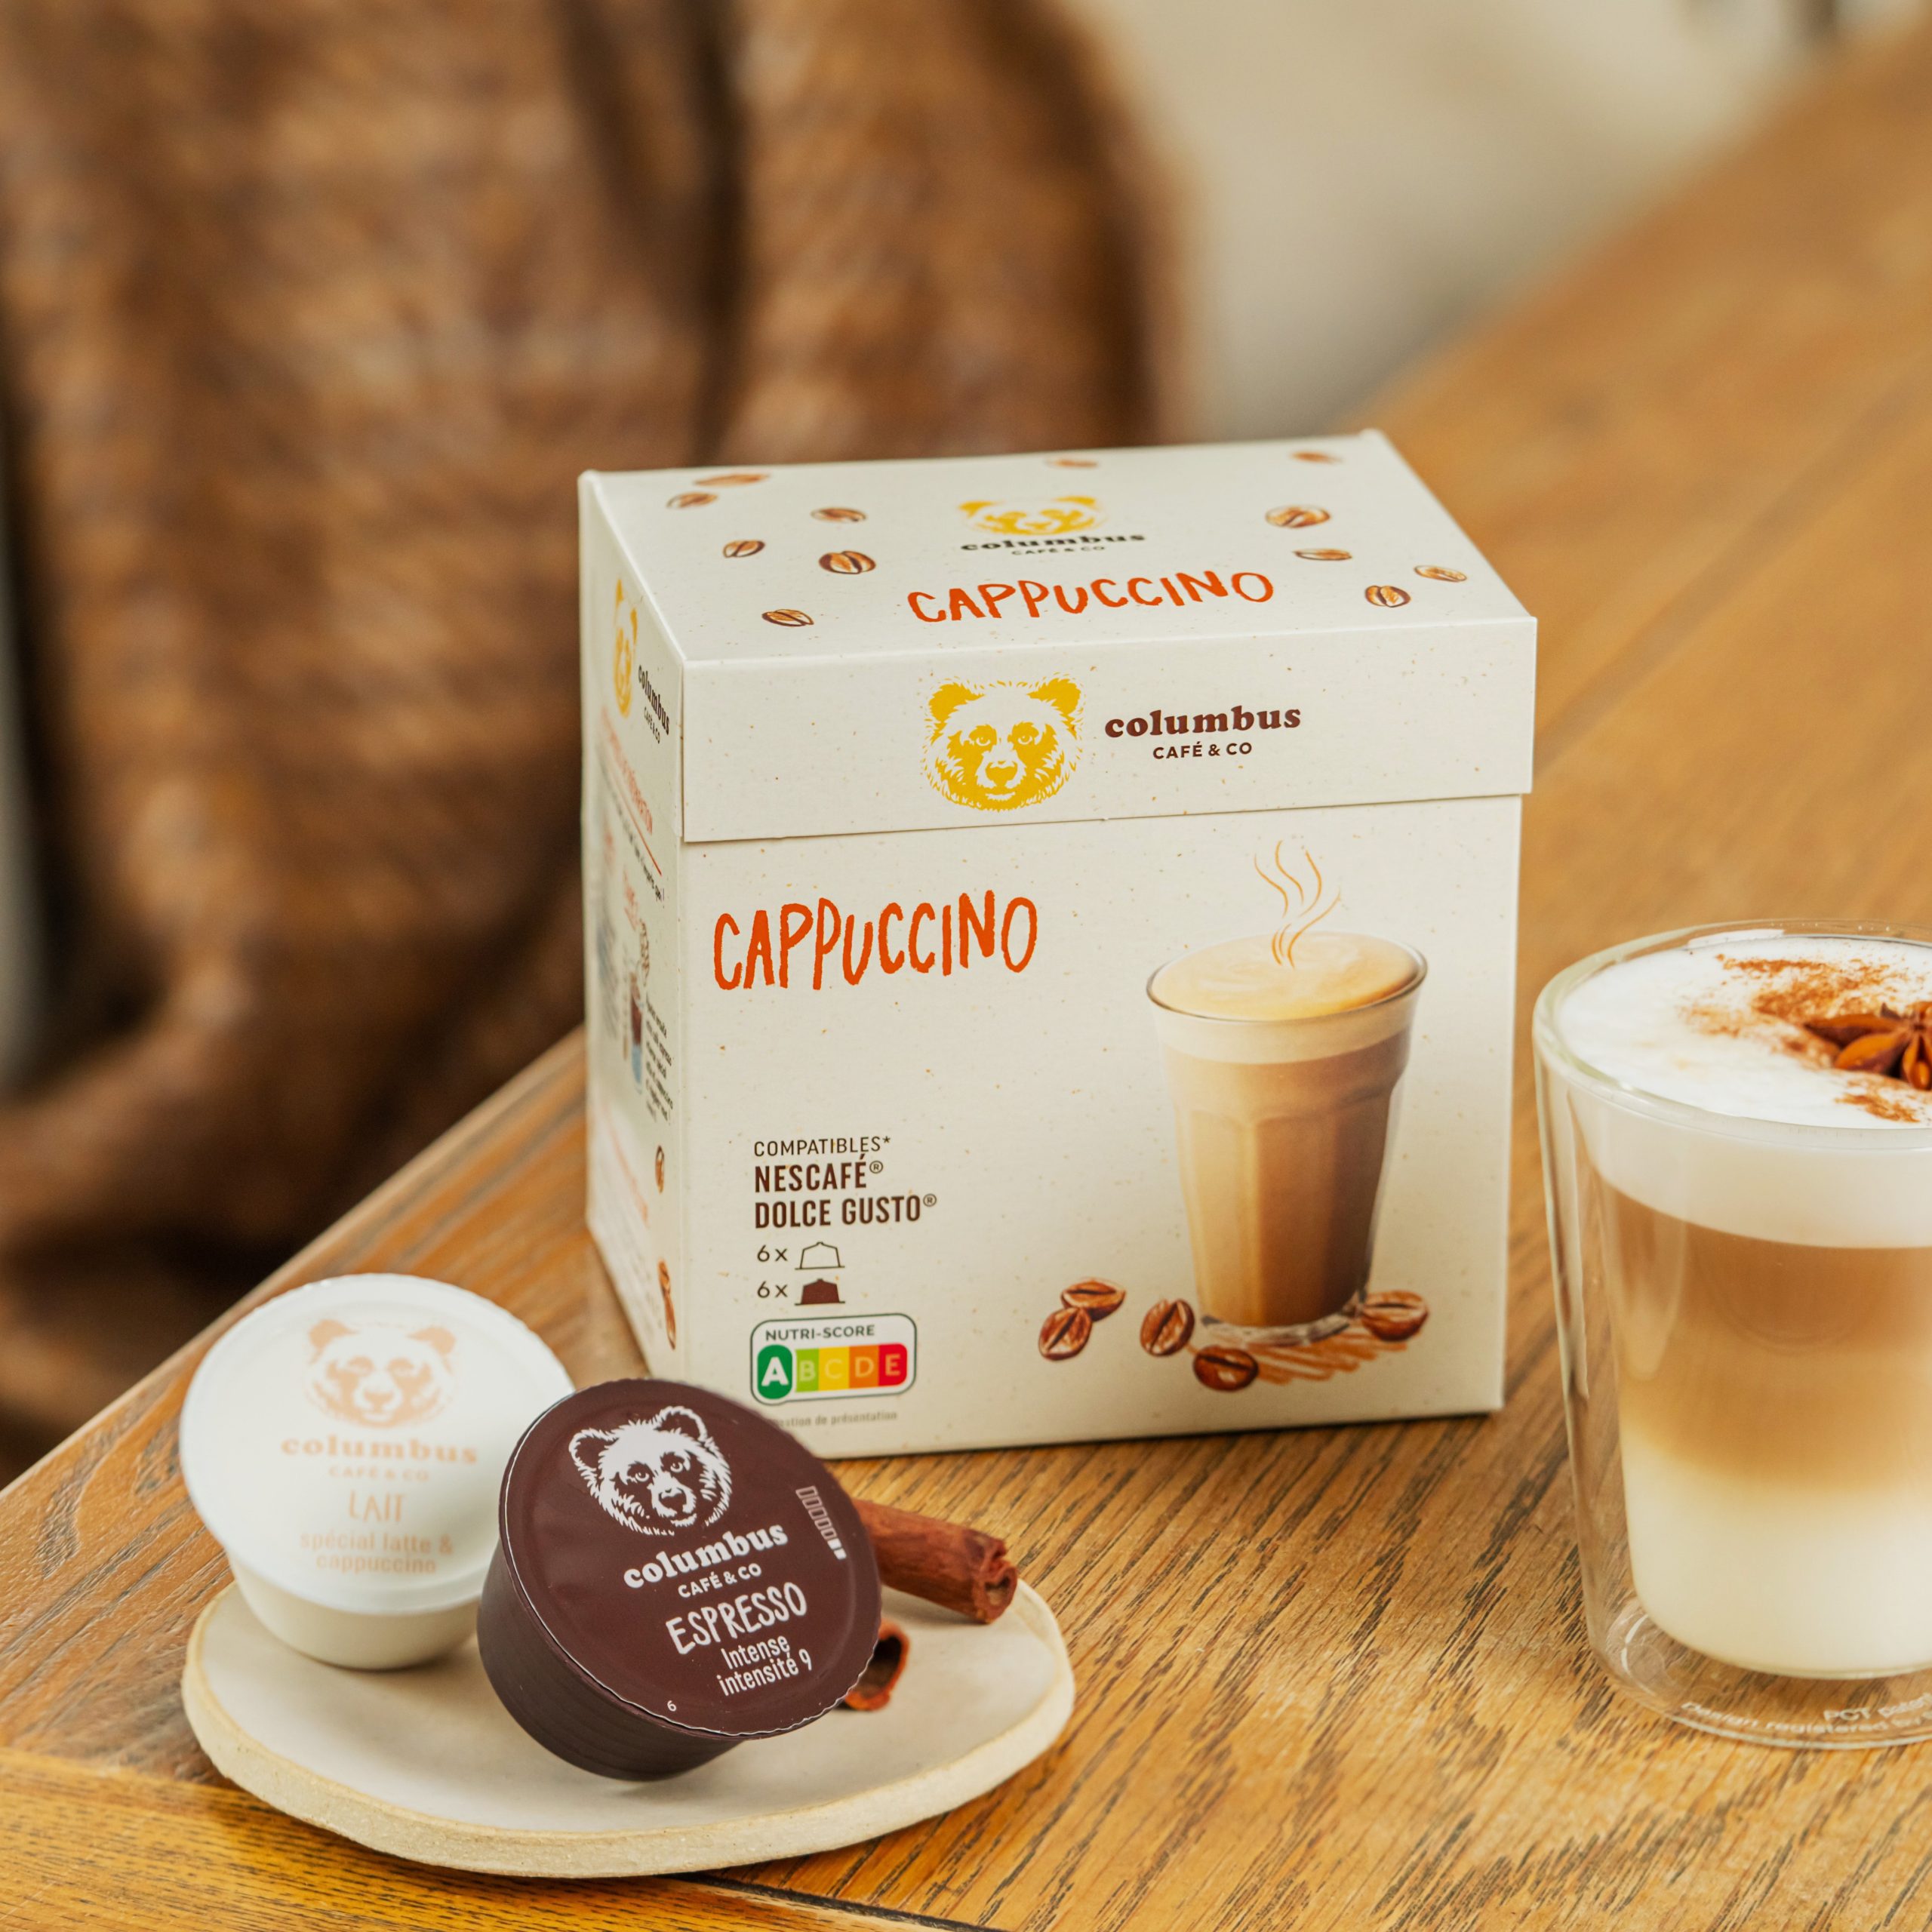 101Caffè - Cappuccino vanille - Capsules Dolce Gusto - 4 x 12 pièces